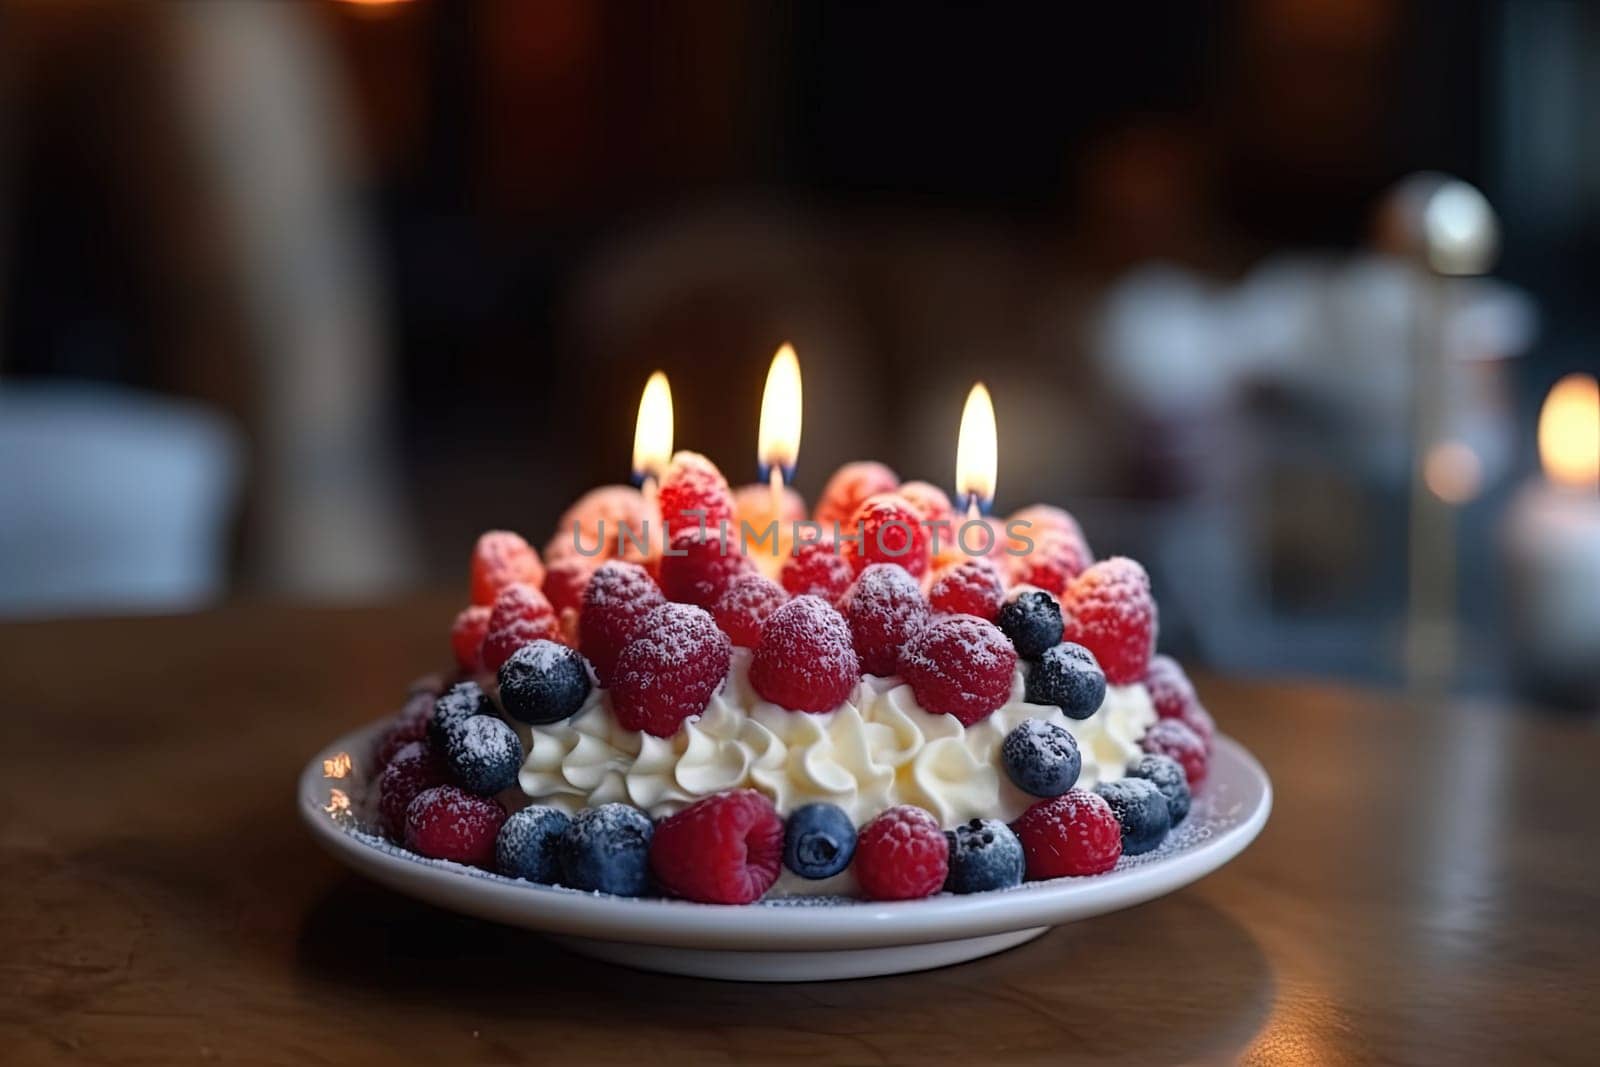 Close-up shot of a small cake with assorted berries and candles on a plate on the table with a blurred background